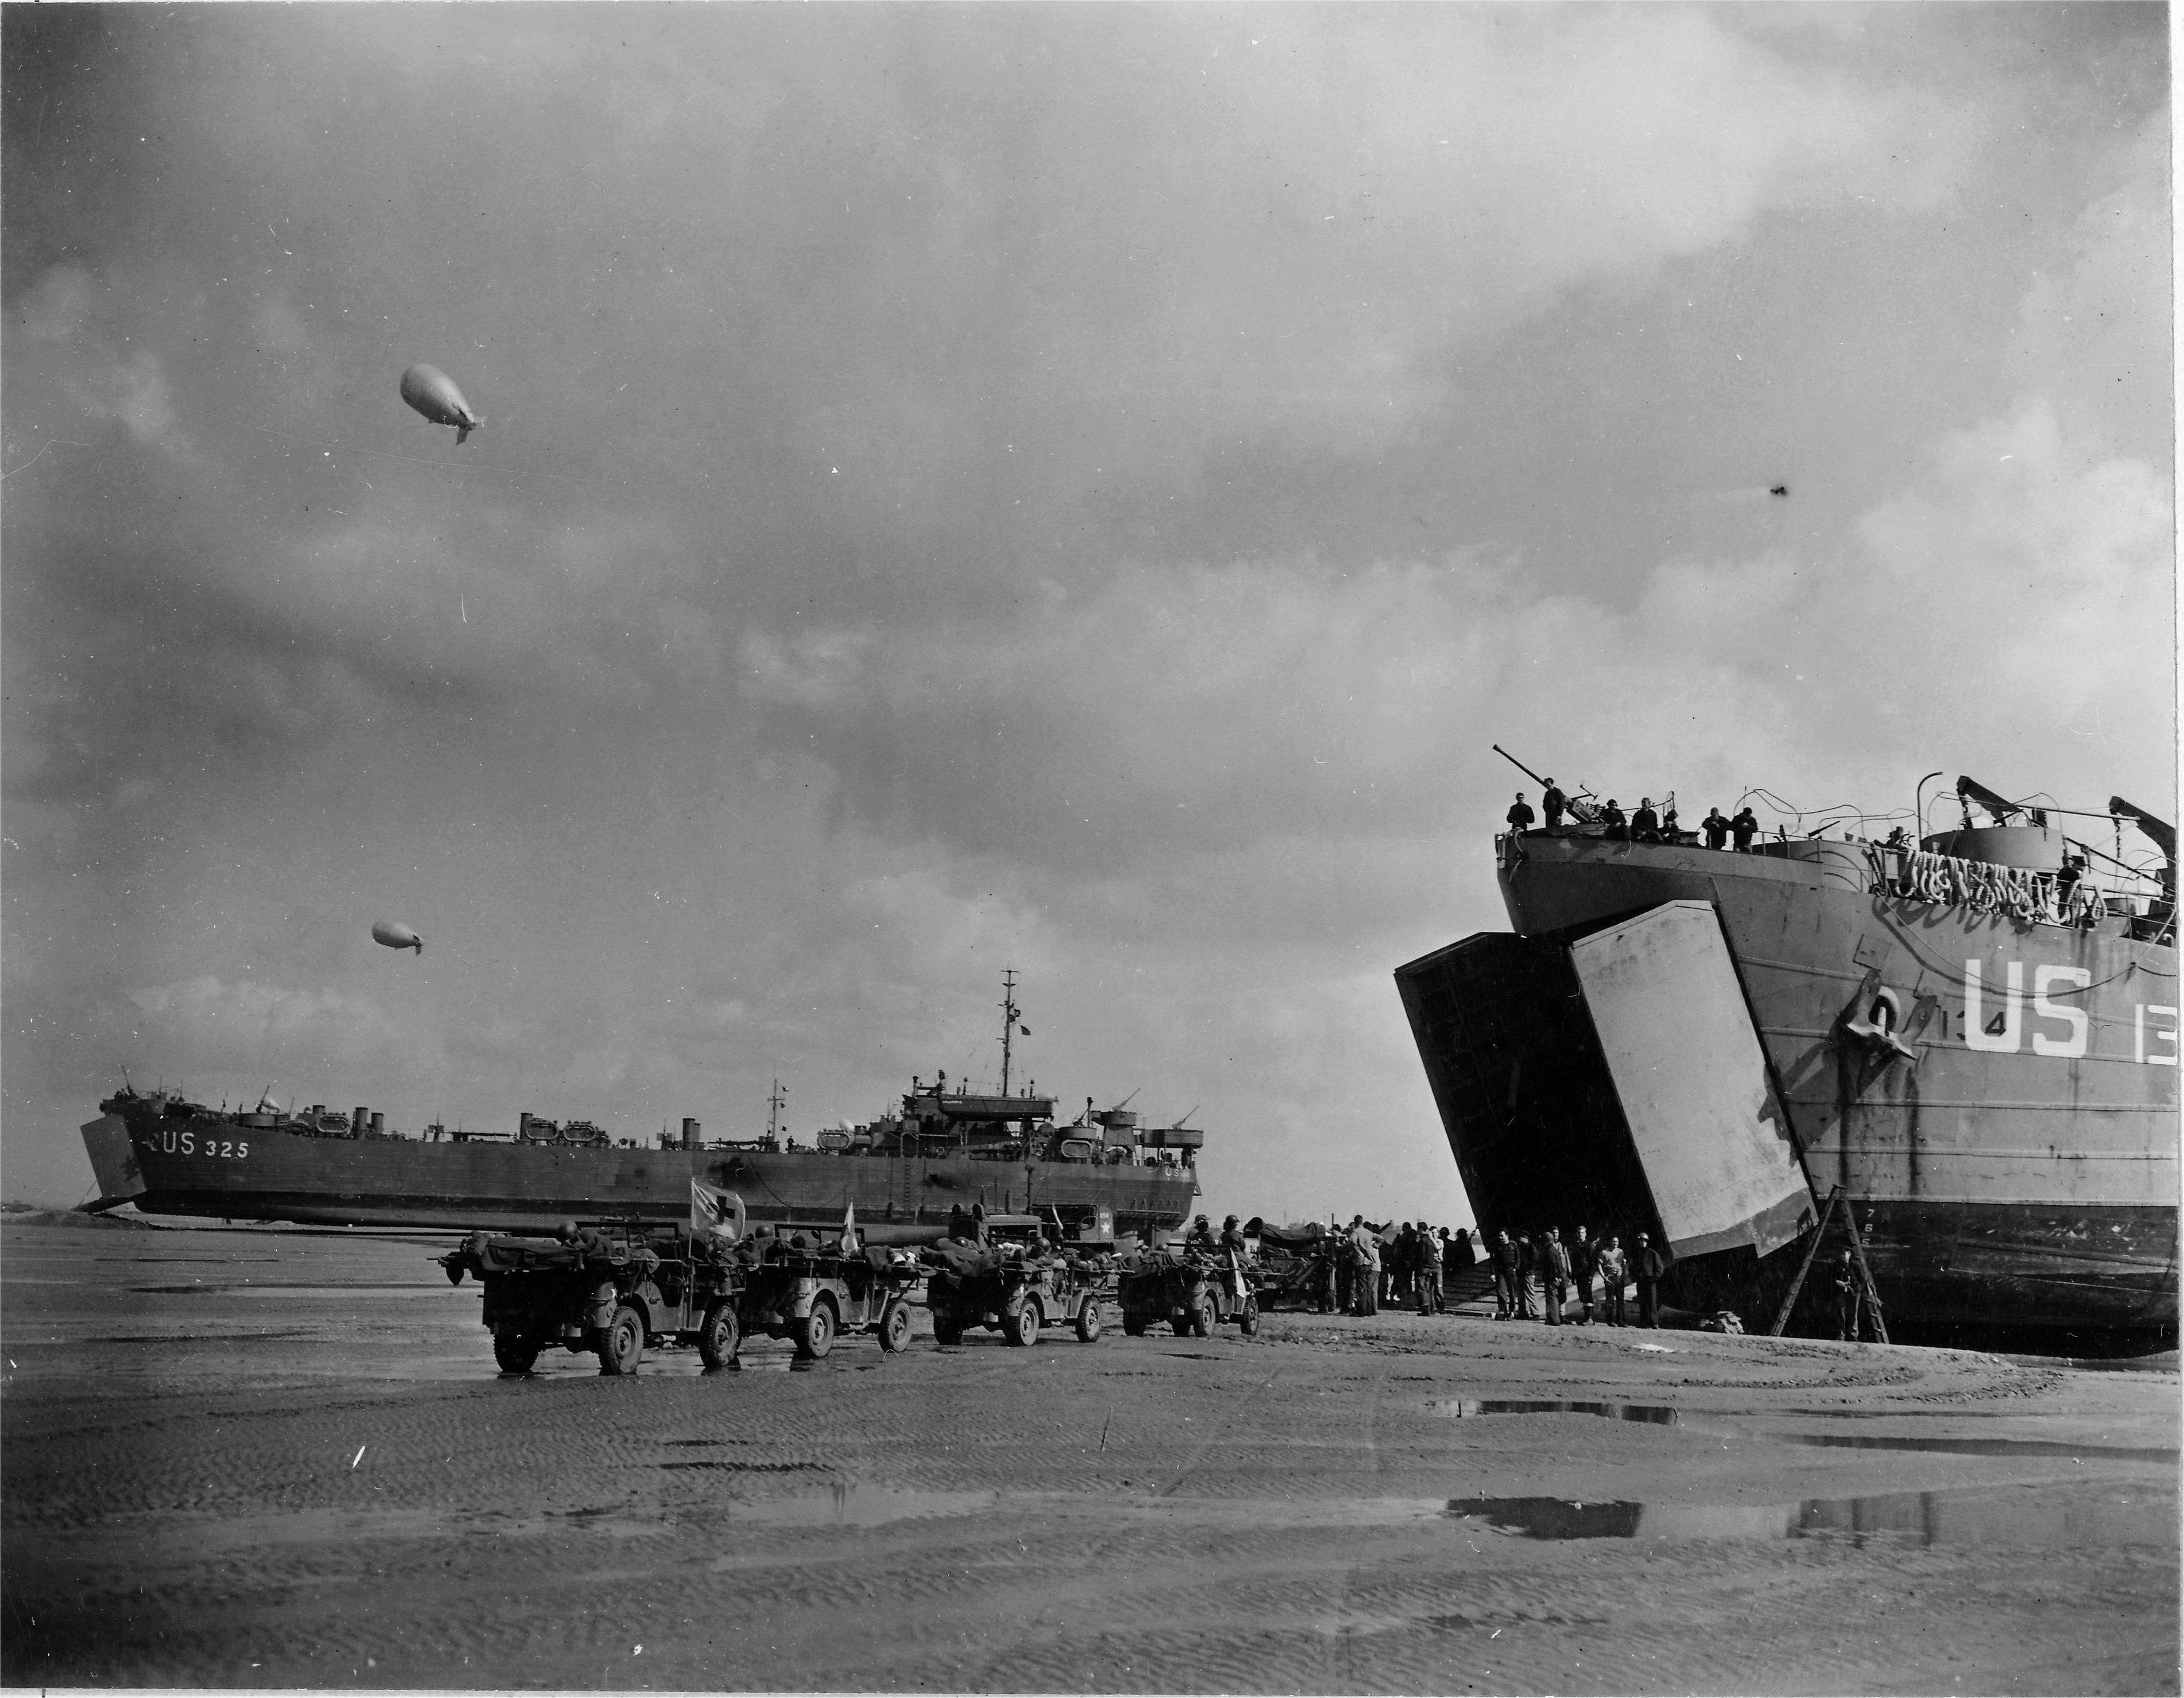 US Navy LST-134 and LST-325 beached at Normandy, France as jeeps driving along the invasion beach carry casualties to the waiting vessels, 12 Jun 1944, photo 1 of 4